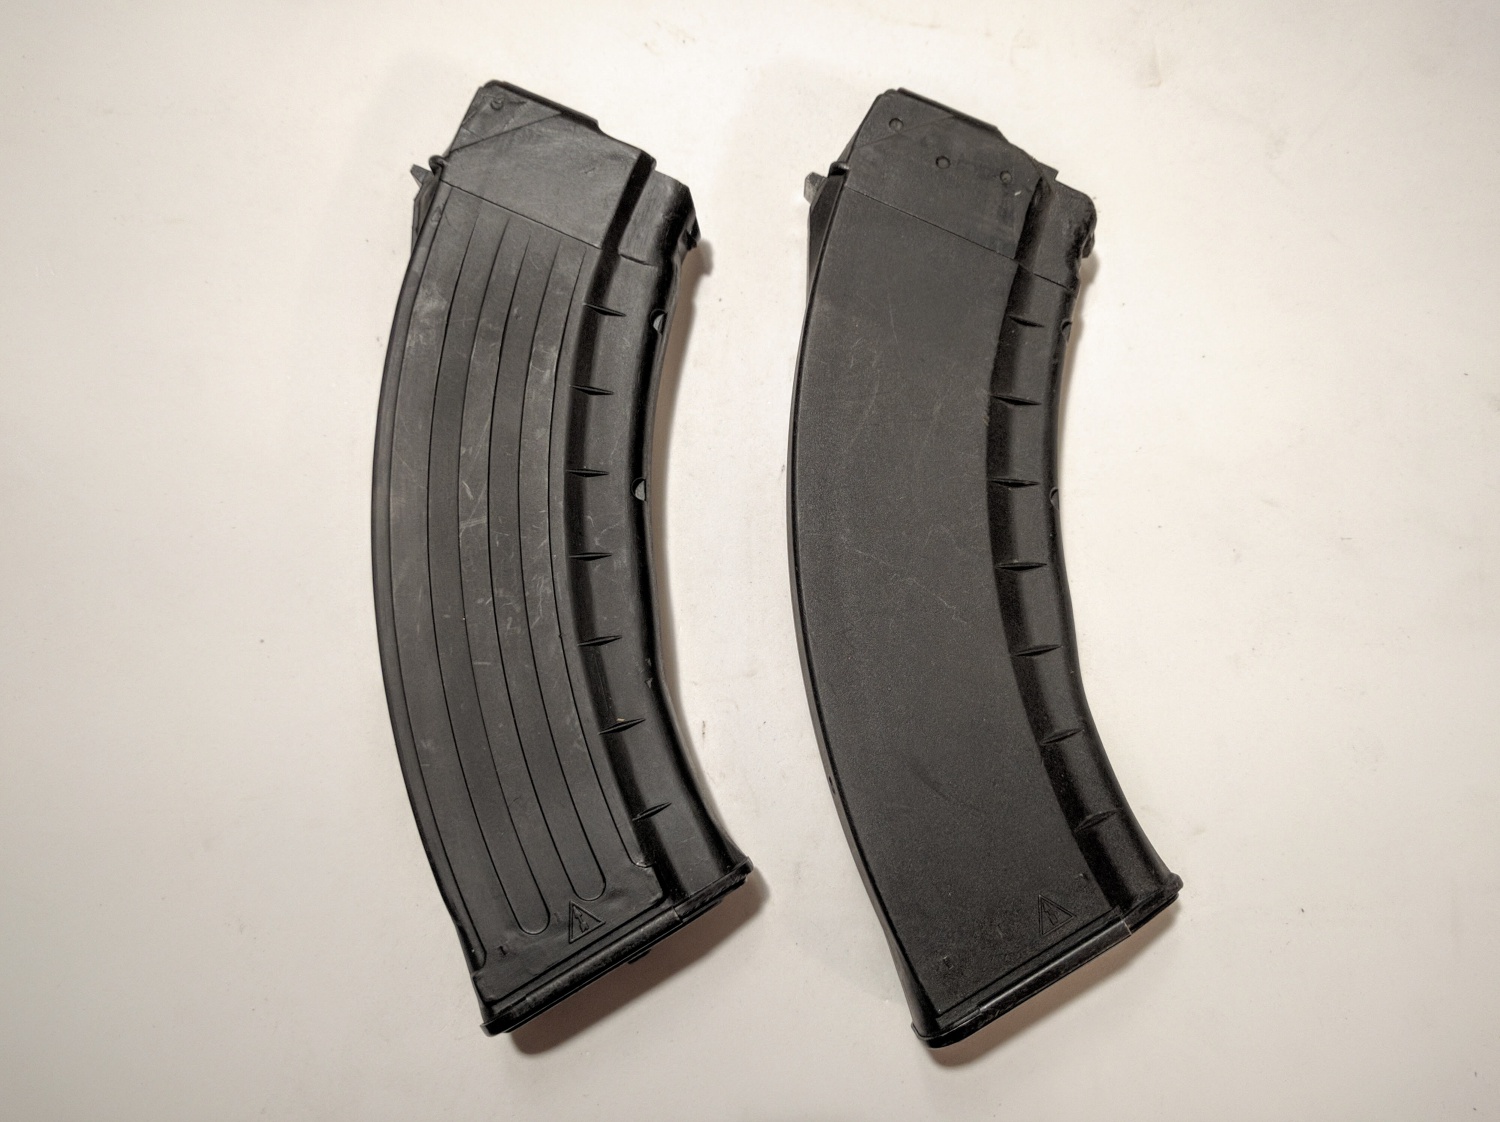 First gen (left) and second gen (right) AK-103 magazines, only the second g...